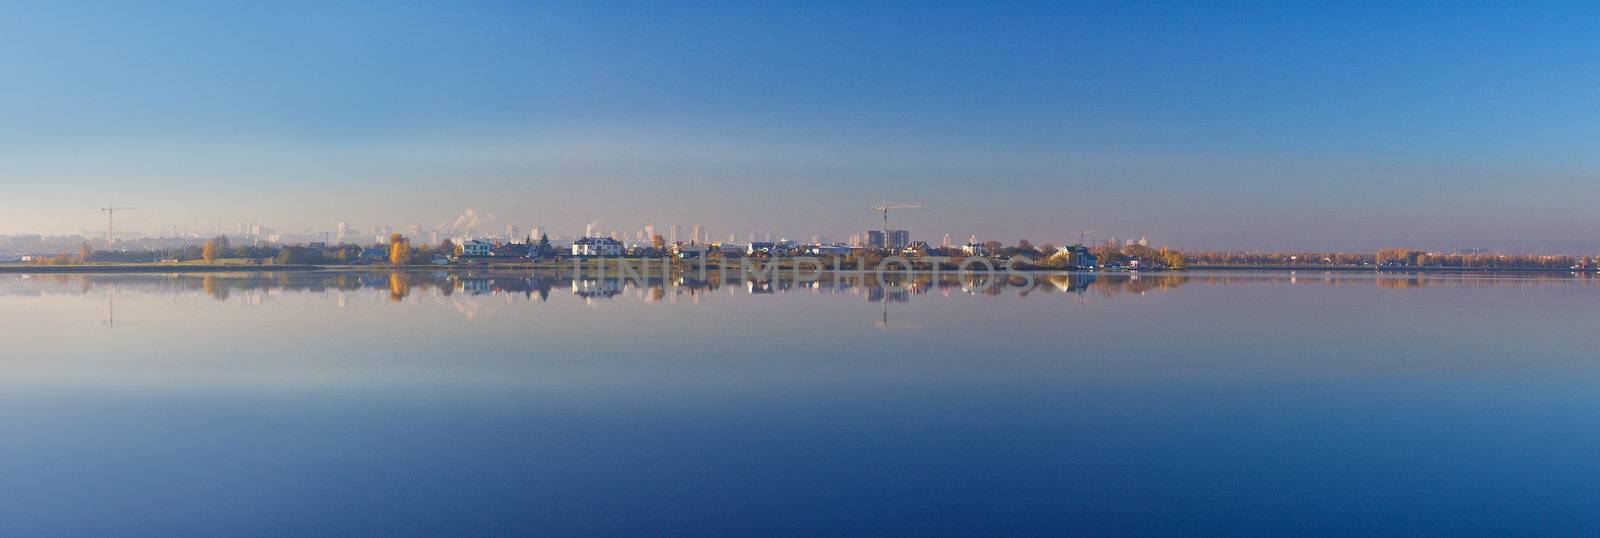 panorama of reflecting city by Alekcey